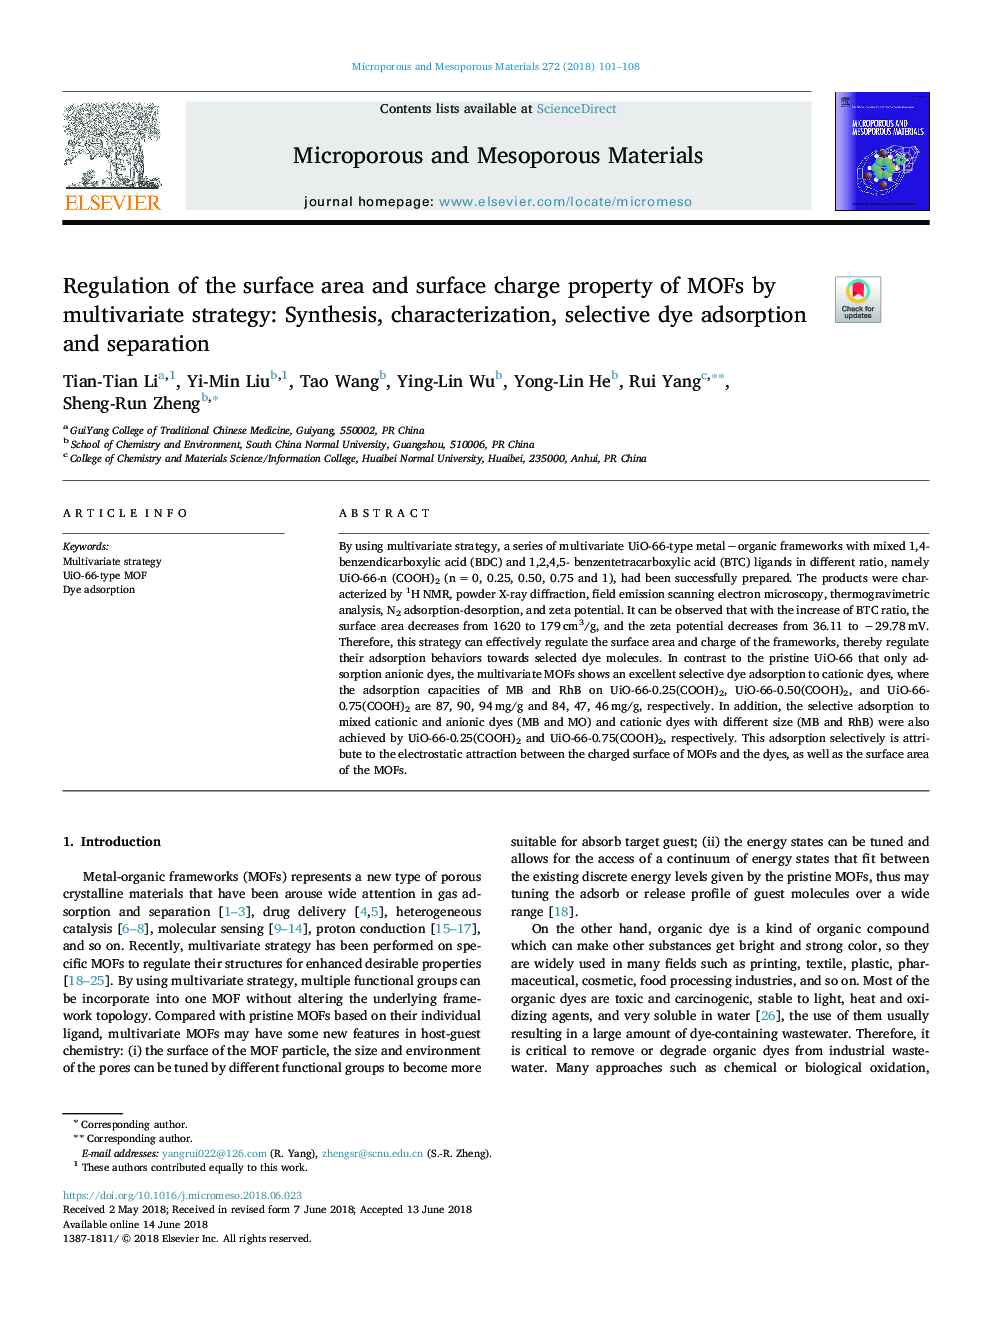 Regulation of the surface area and surface charge property of MOFs by multivariate strategy: Synthesis, characterization, selective dye adsorption and separation